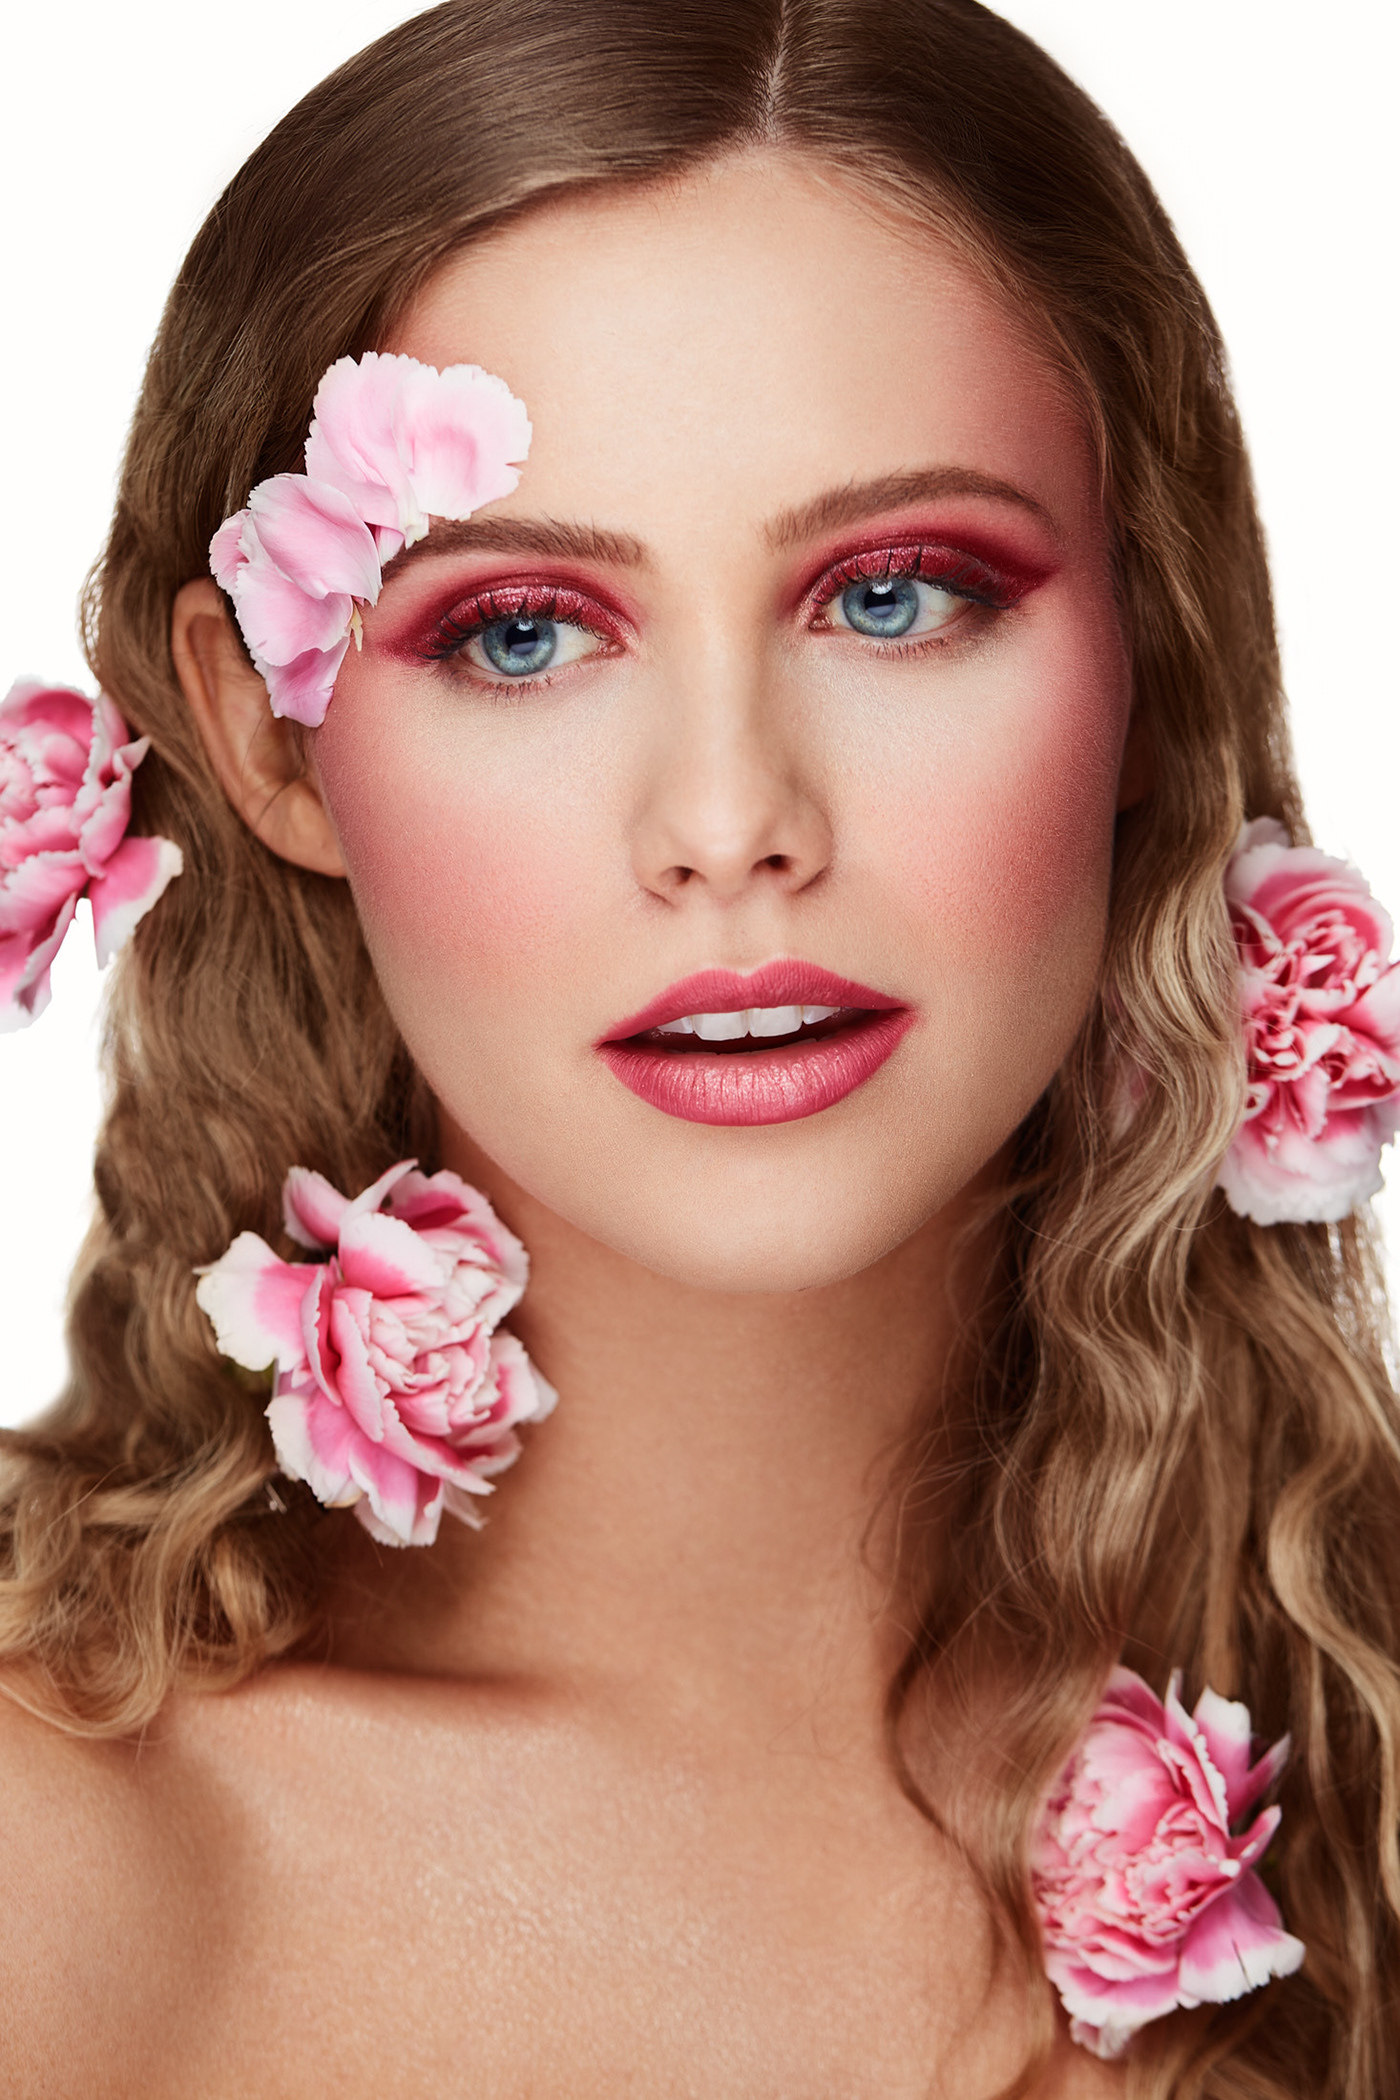 beauty editorial beauty photography blonde carnations floral photoshoot pink makeup